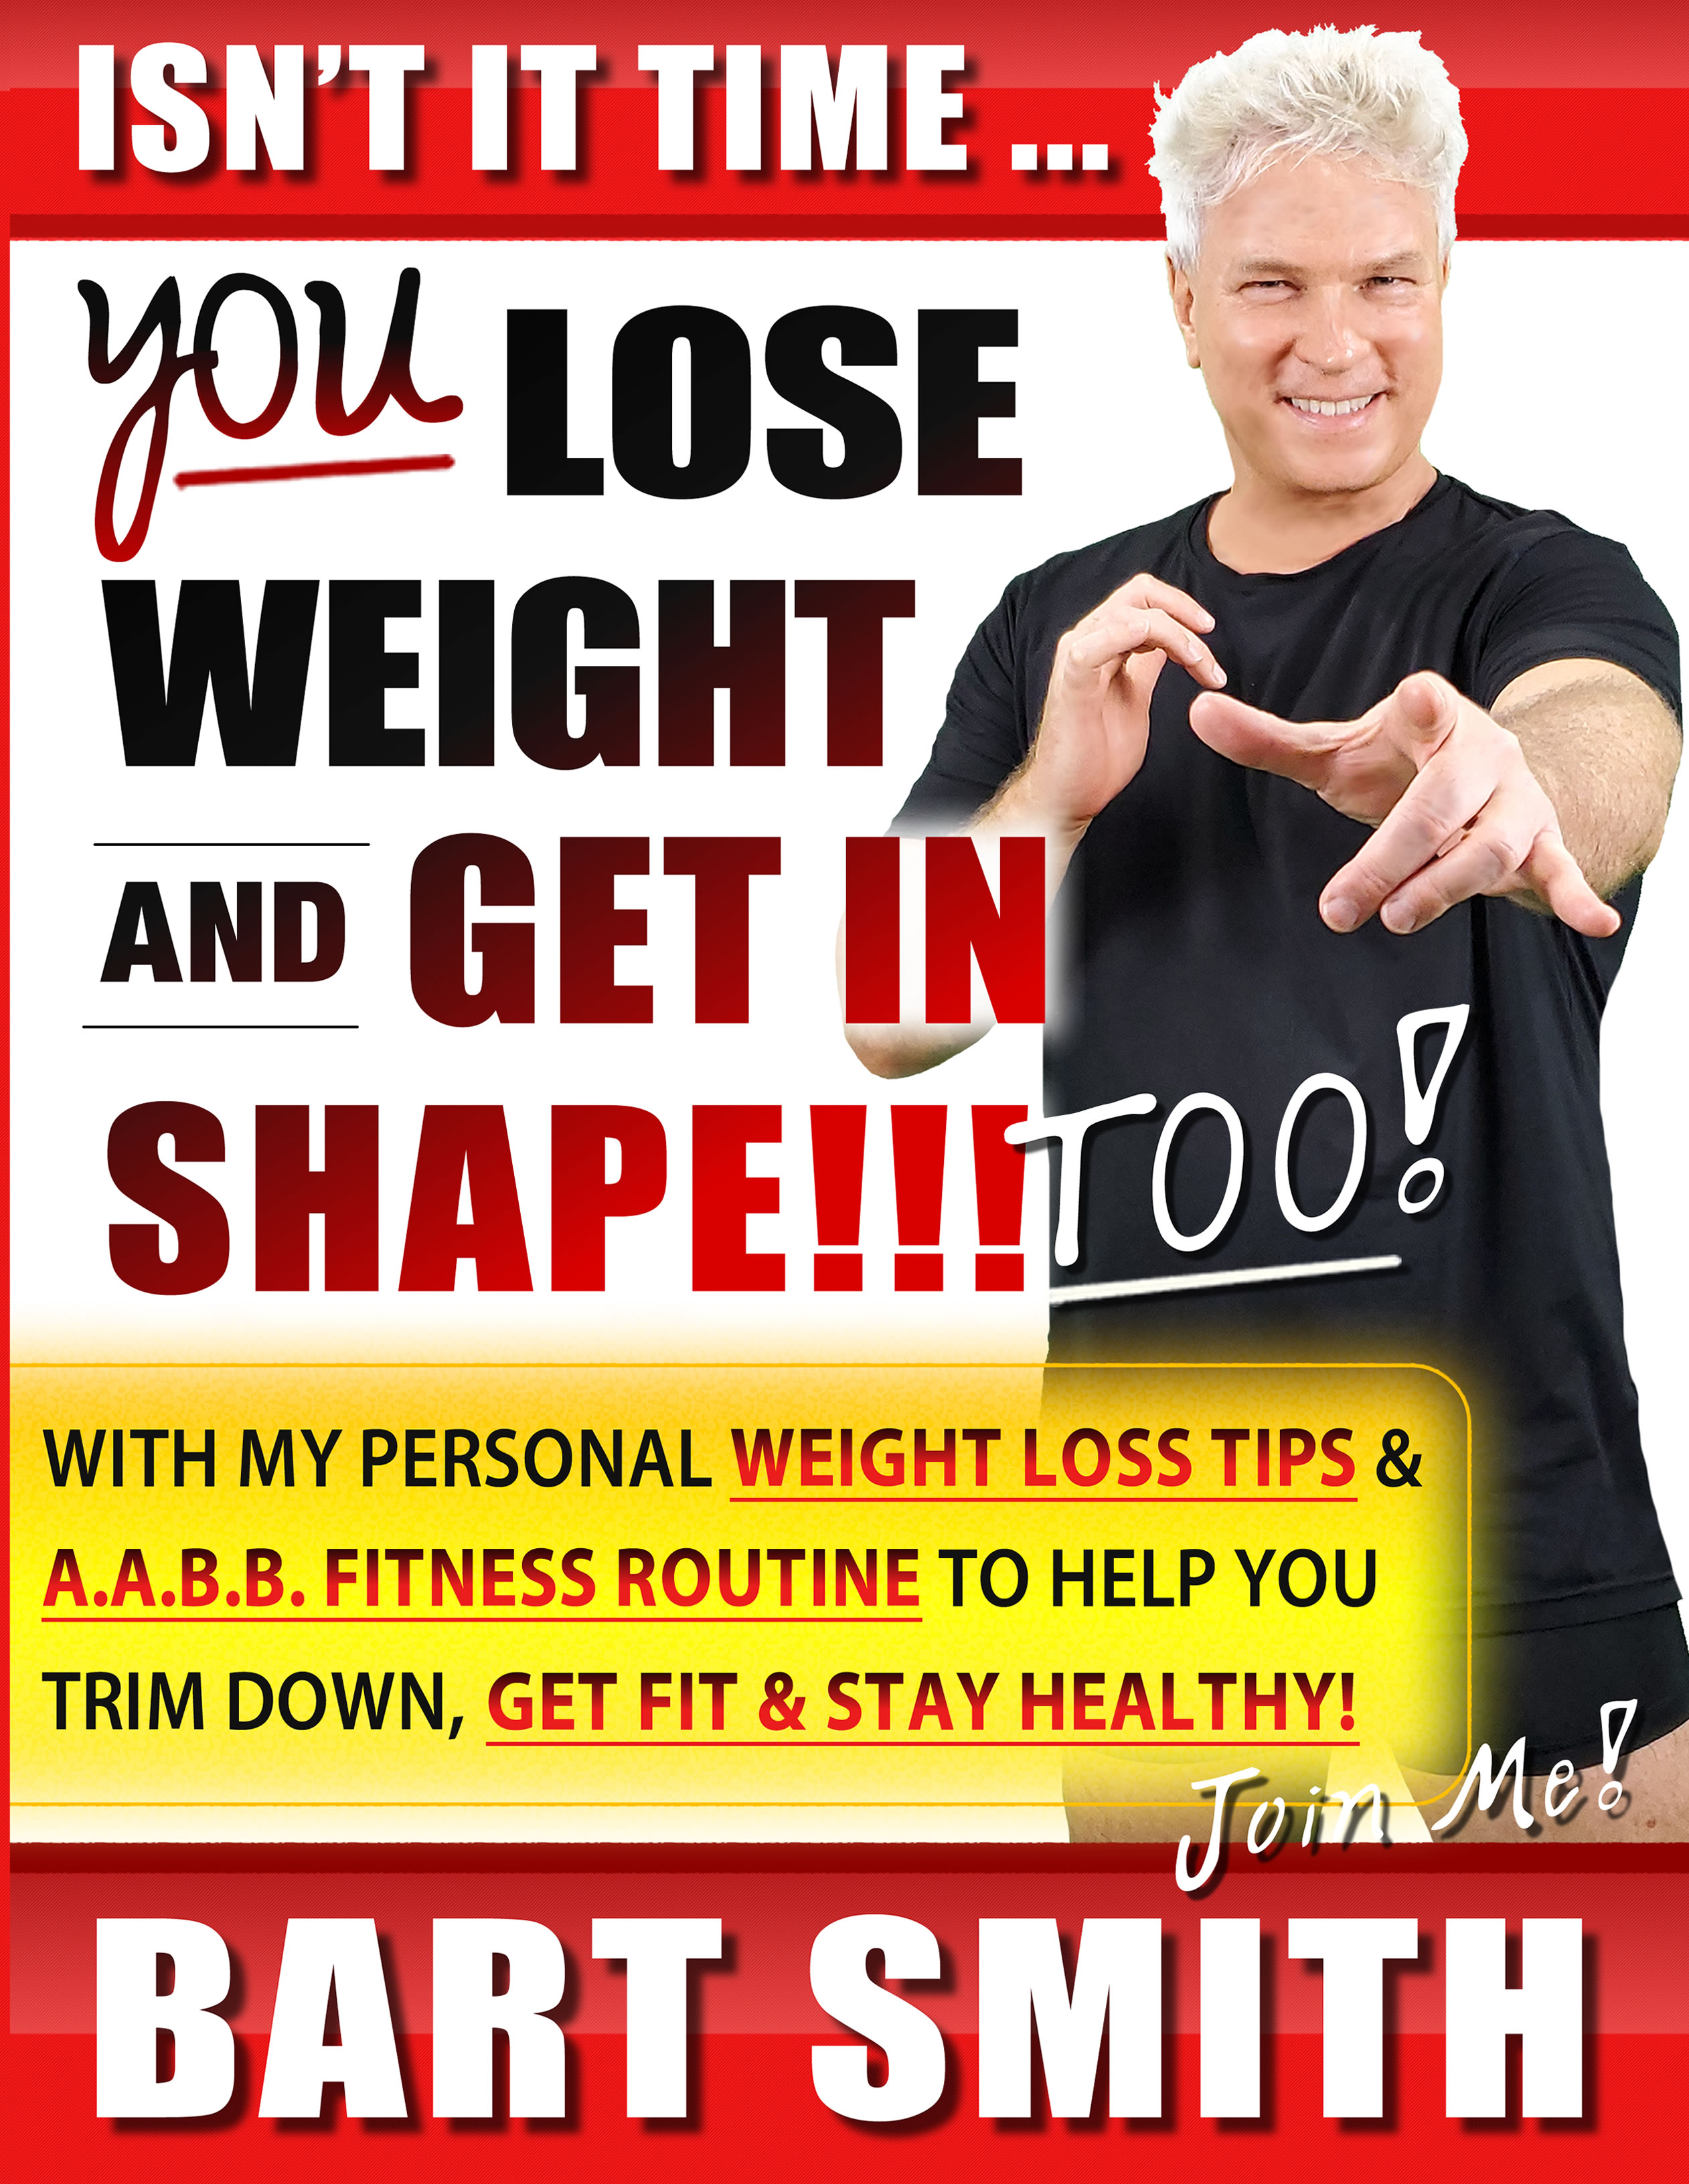 Lose Weight & Get In Shape!!! by Bart Smith